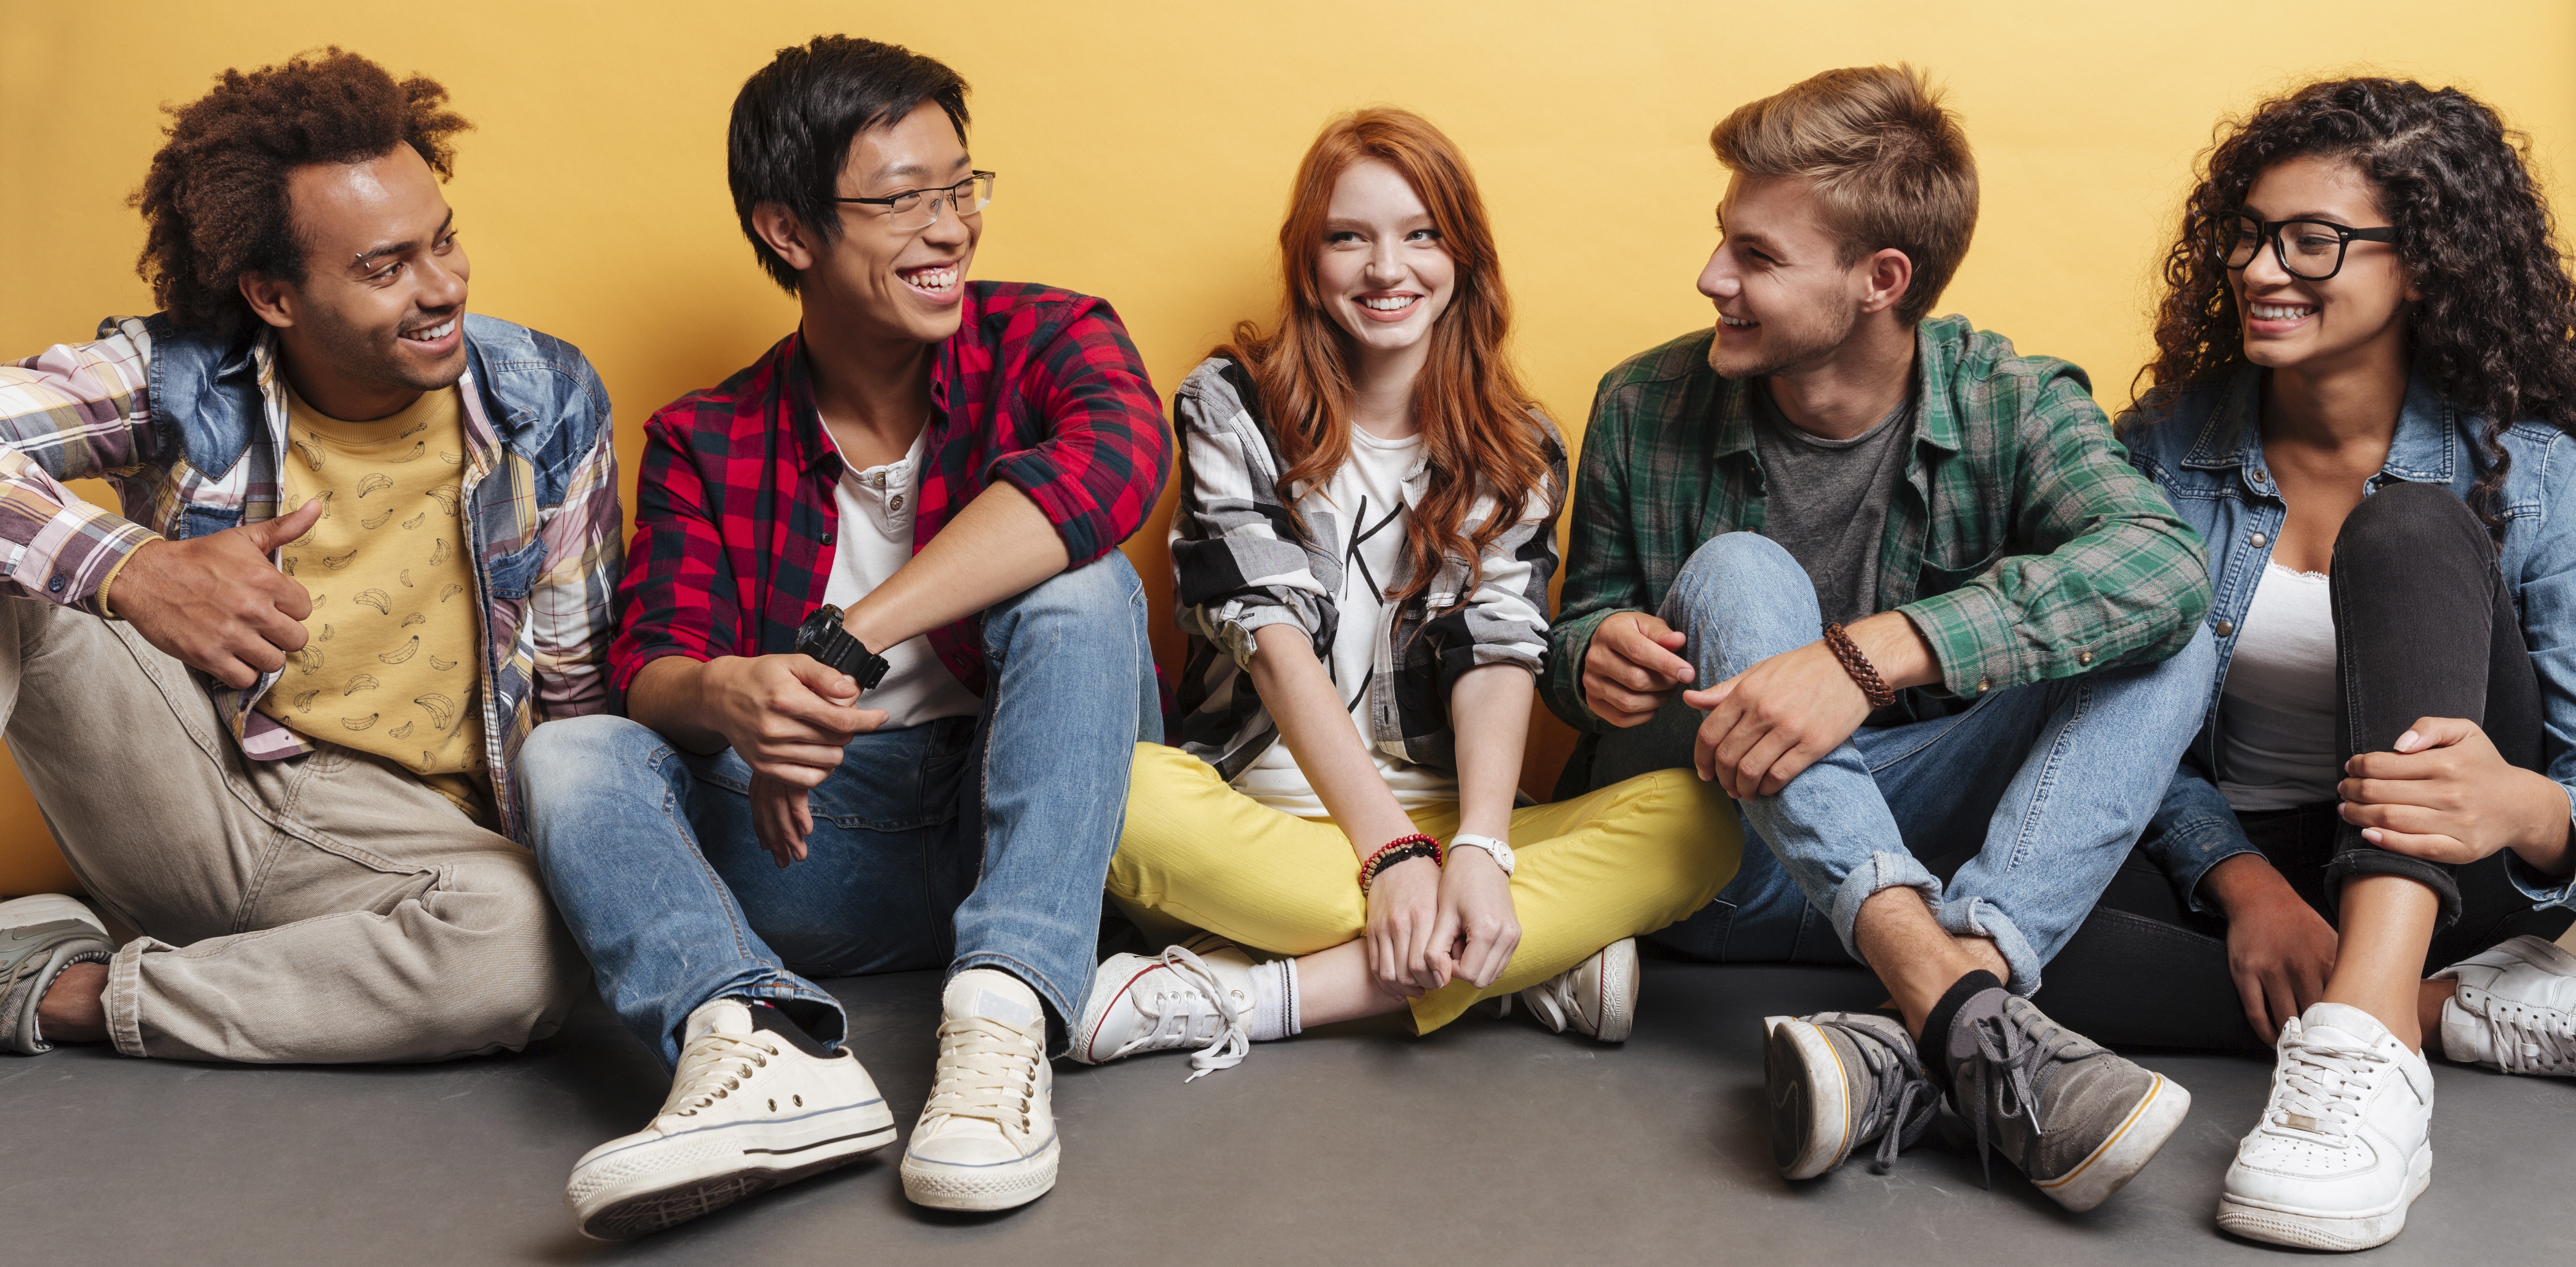 group of diverse teens sitting on the floor smiling